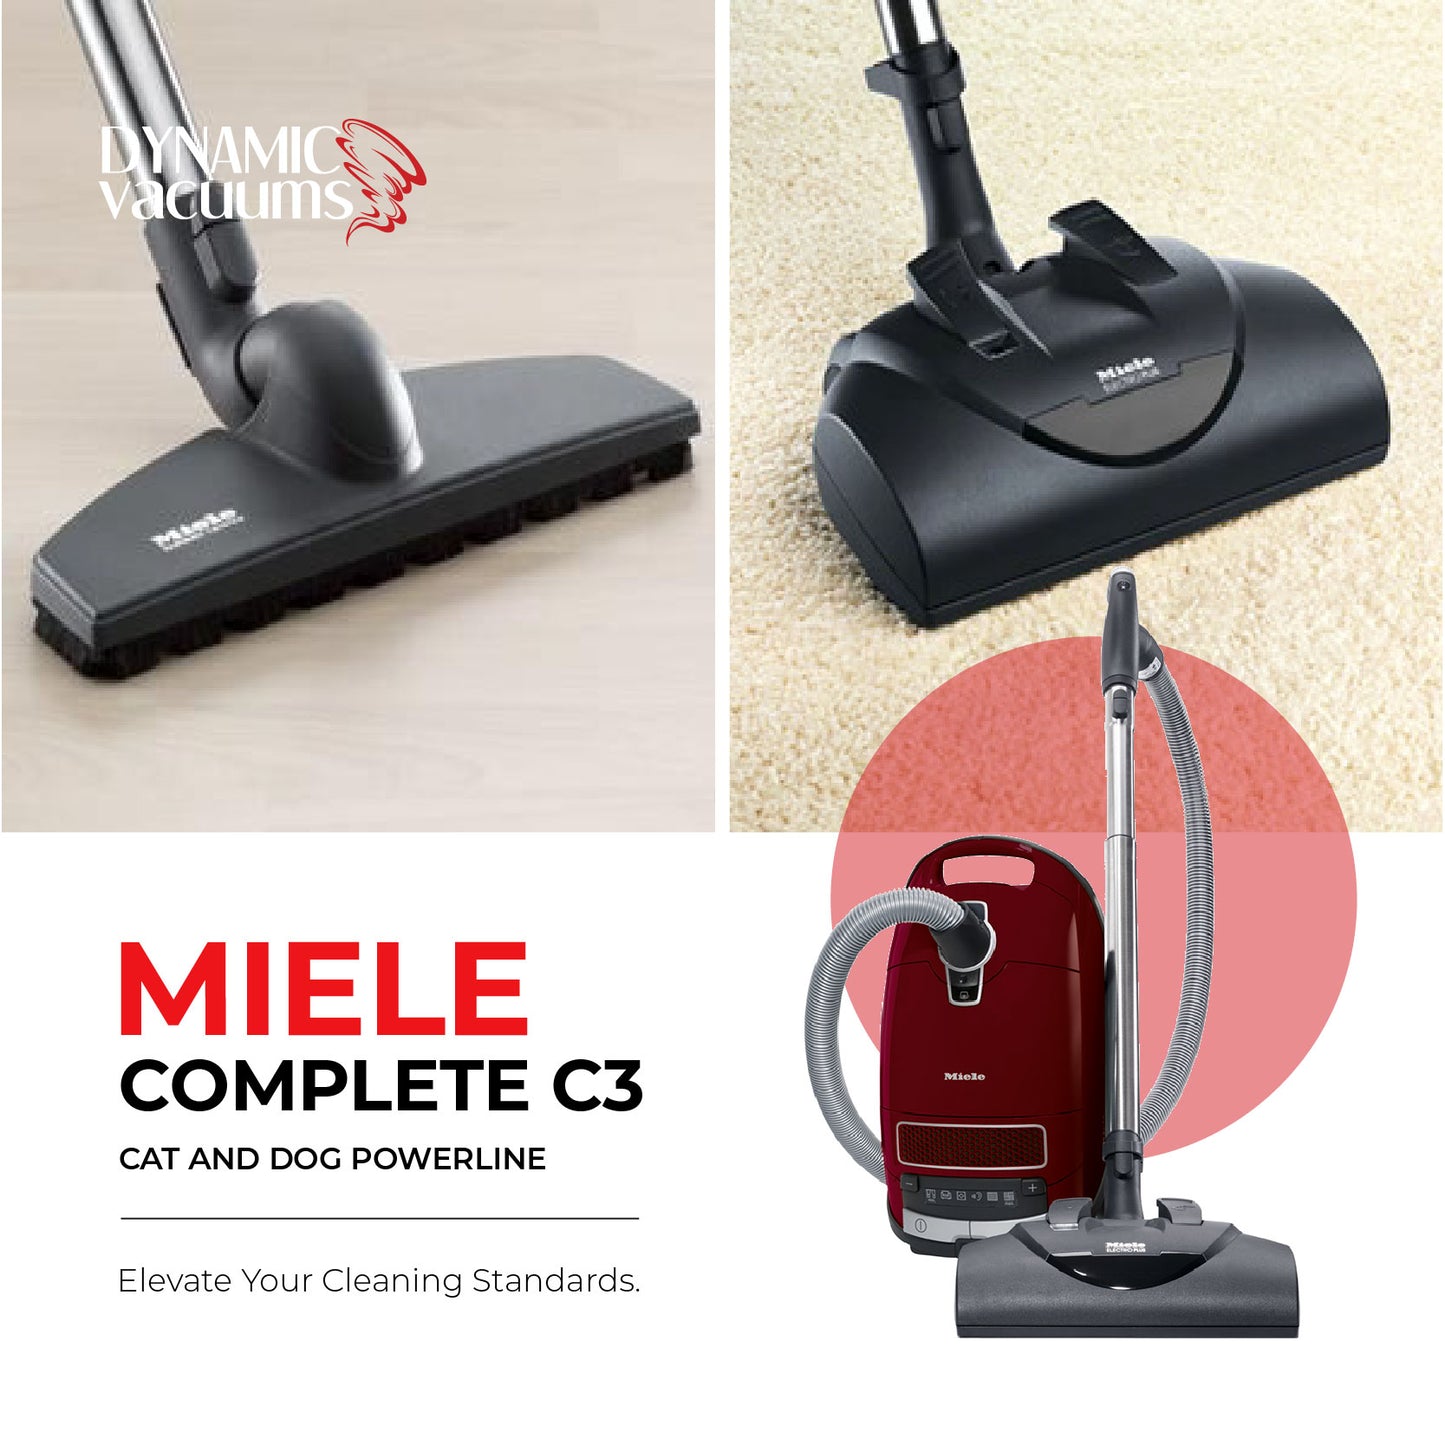 Miele Complete C3 Cat and Dog PowerLine